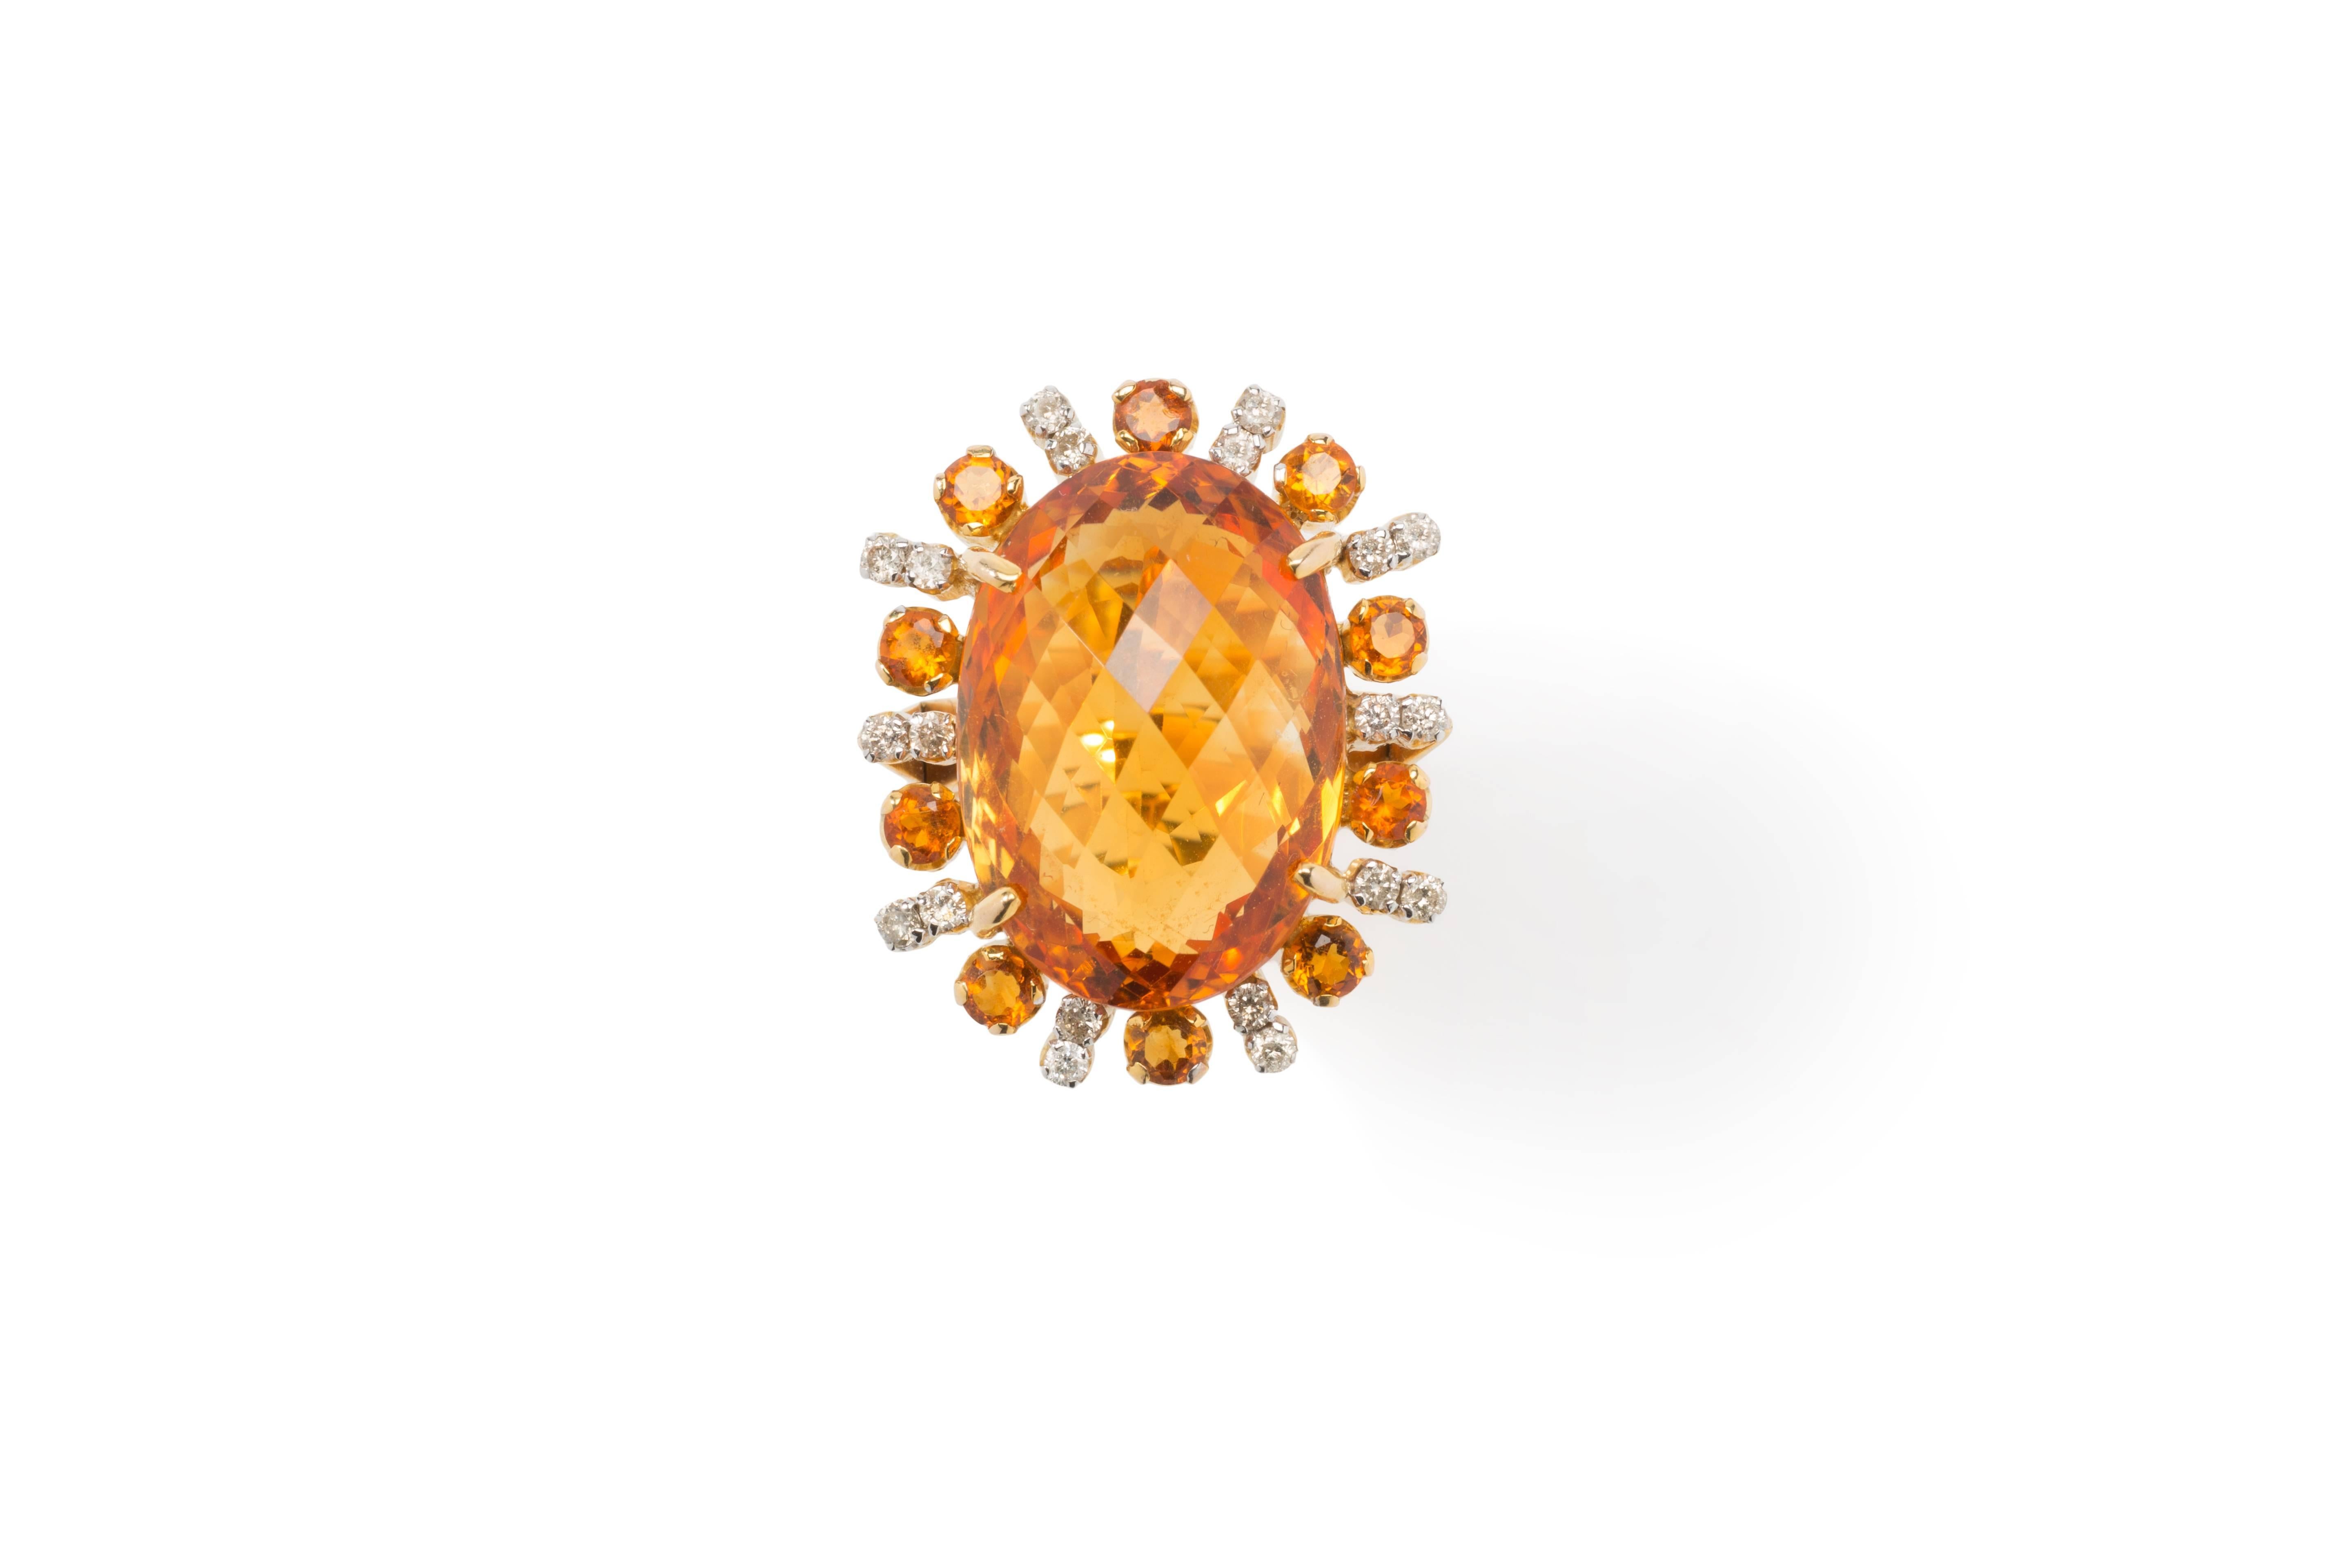 Impressive 18 carat yellow gold ring. The large oval shaped and faceted Madeira topaz surrounded by 10 small topazes and 20 brilliant-cut diamonds weighing circa 0,40 ct. Total weight: 16,38 g. 
Measurements: 1.18 x 0.94 x 0.63 in ( 3 x 2,4 x 1,6 cm